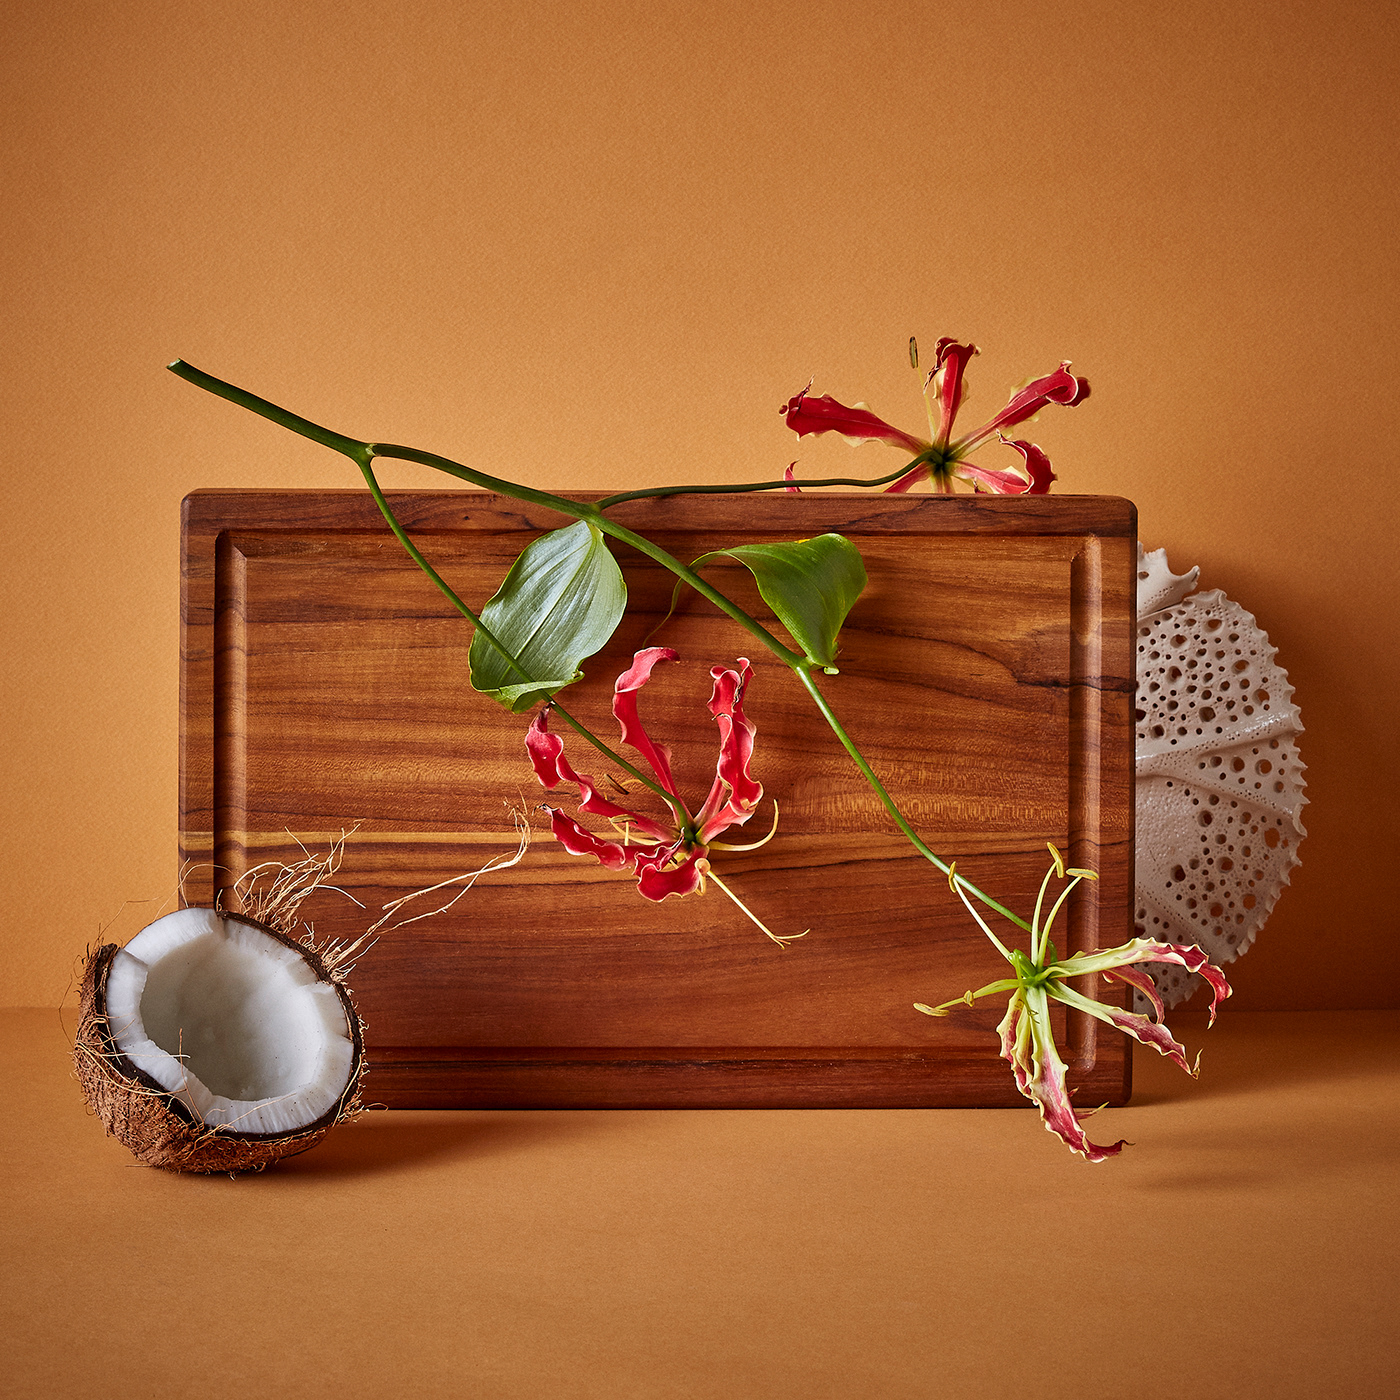 Board cuisine Food  KITCHENWARE still life Tropical wood wood board candle food photography